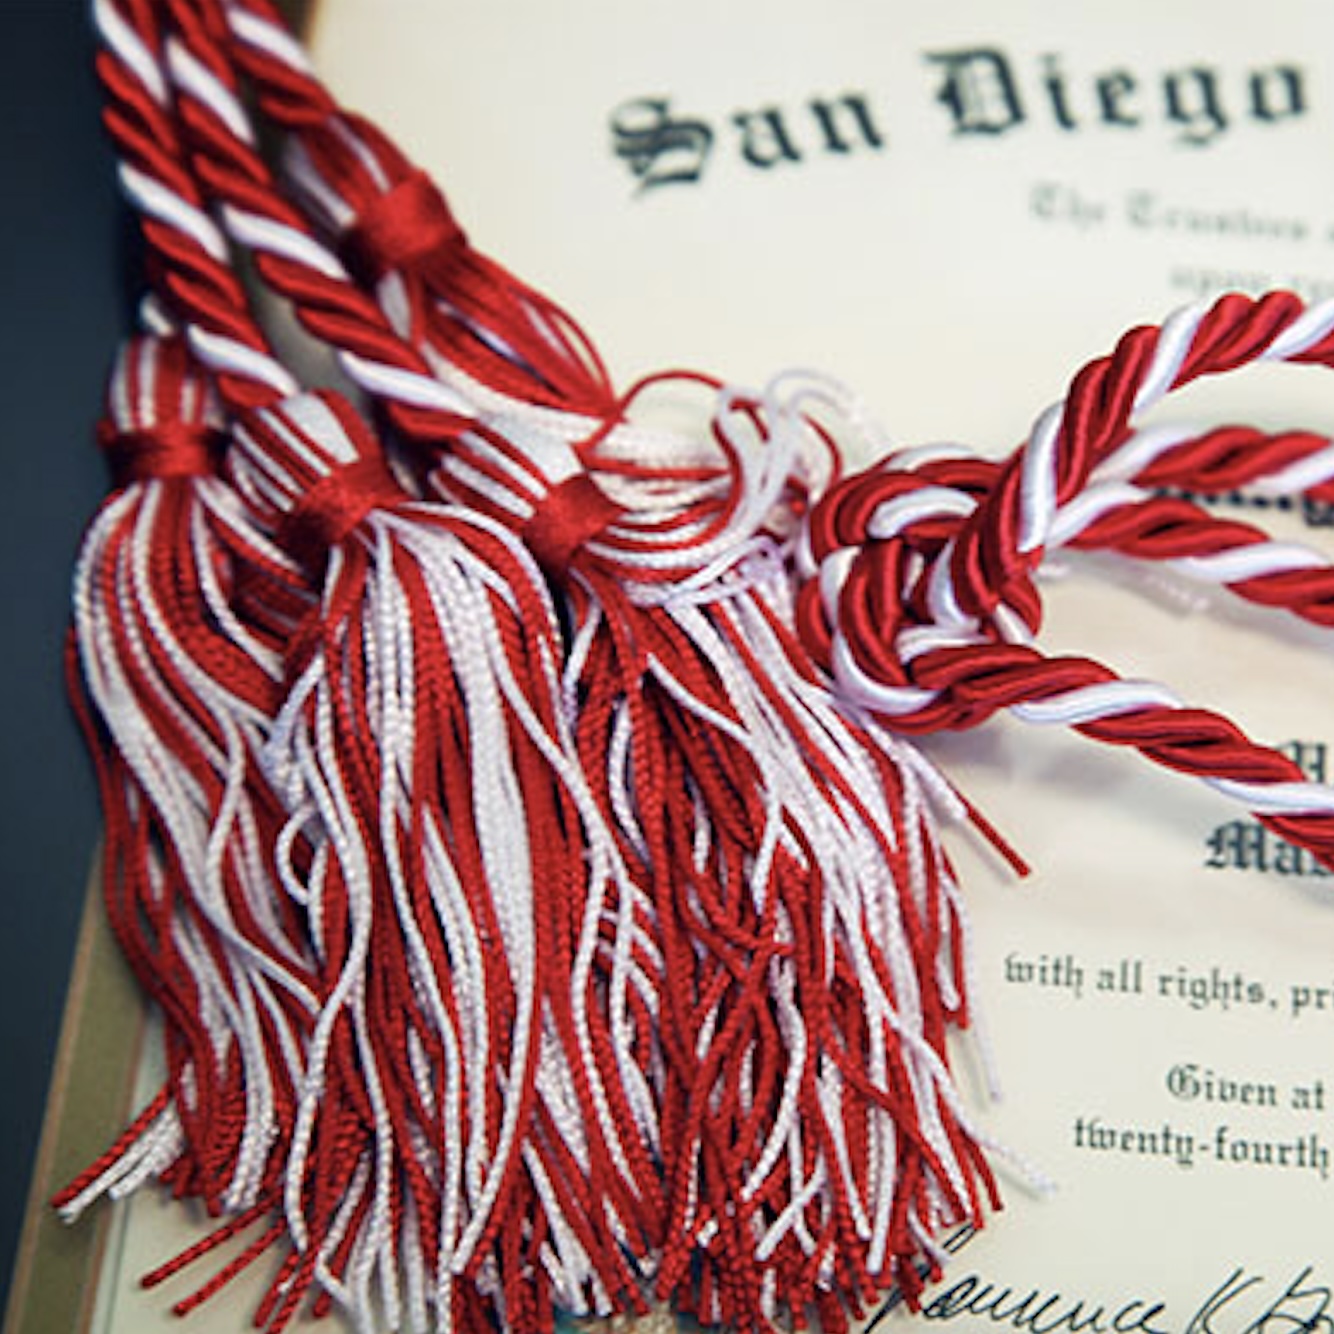 SDSU diploma in the background with a red and white legacy cord on top of it.